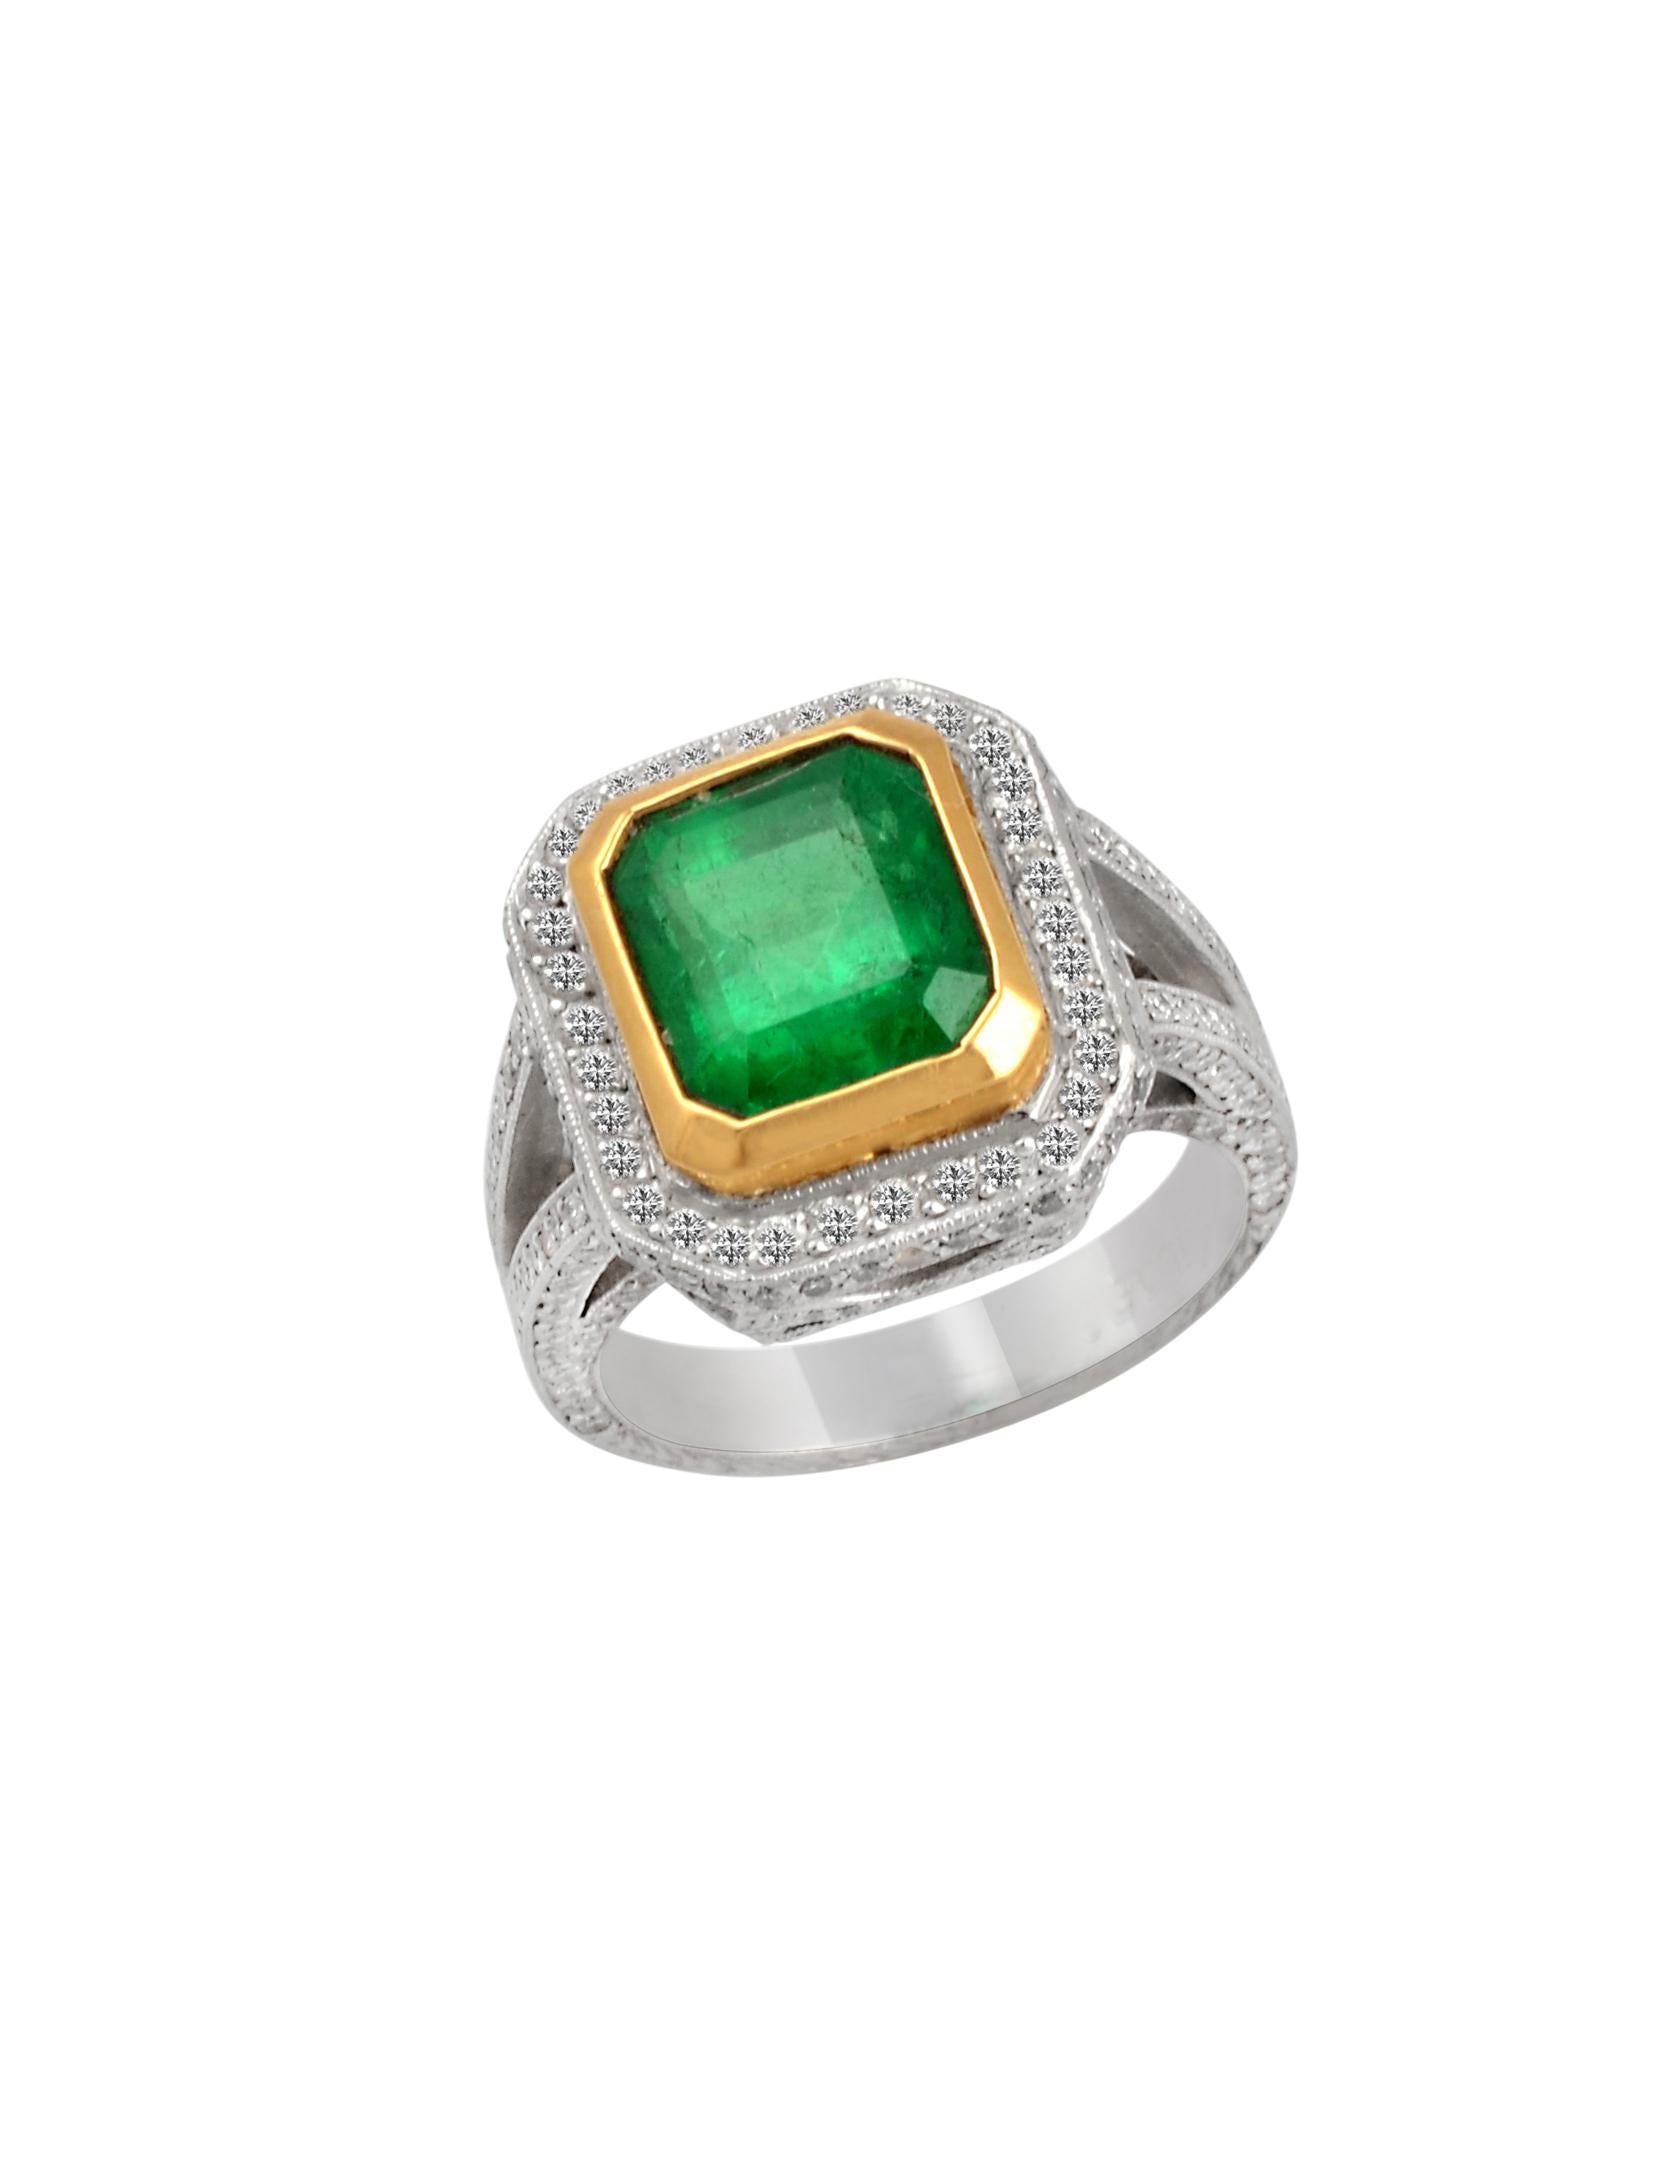 3.8 Carat Emerald Cut Colombian Emerald and Diamond Ring Platinum, Two-Tone 2